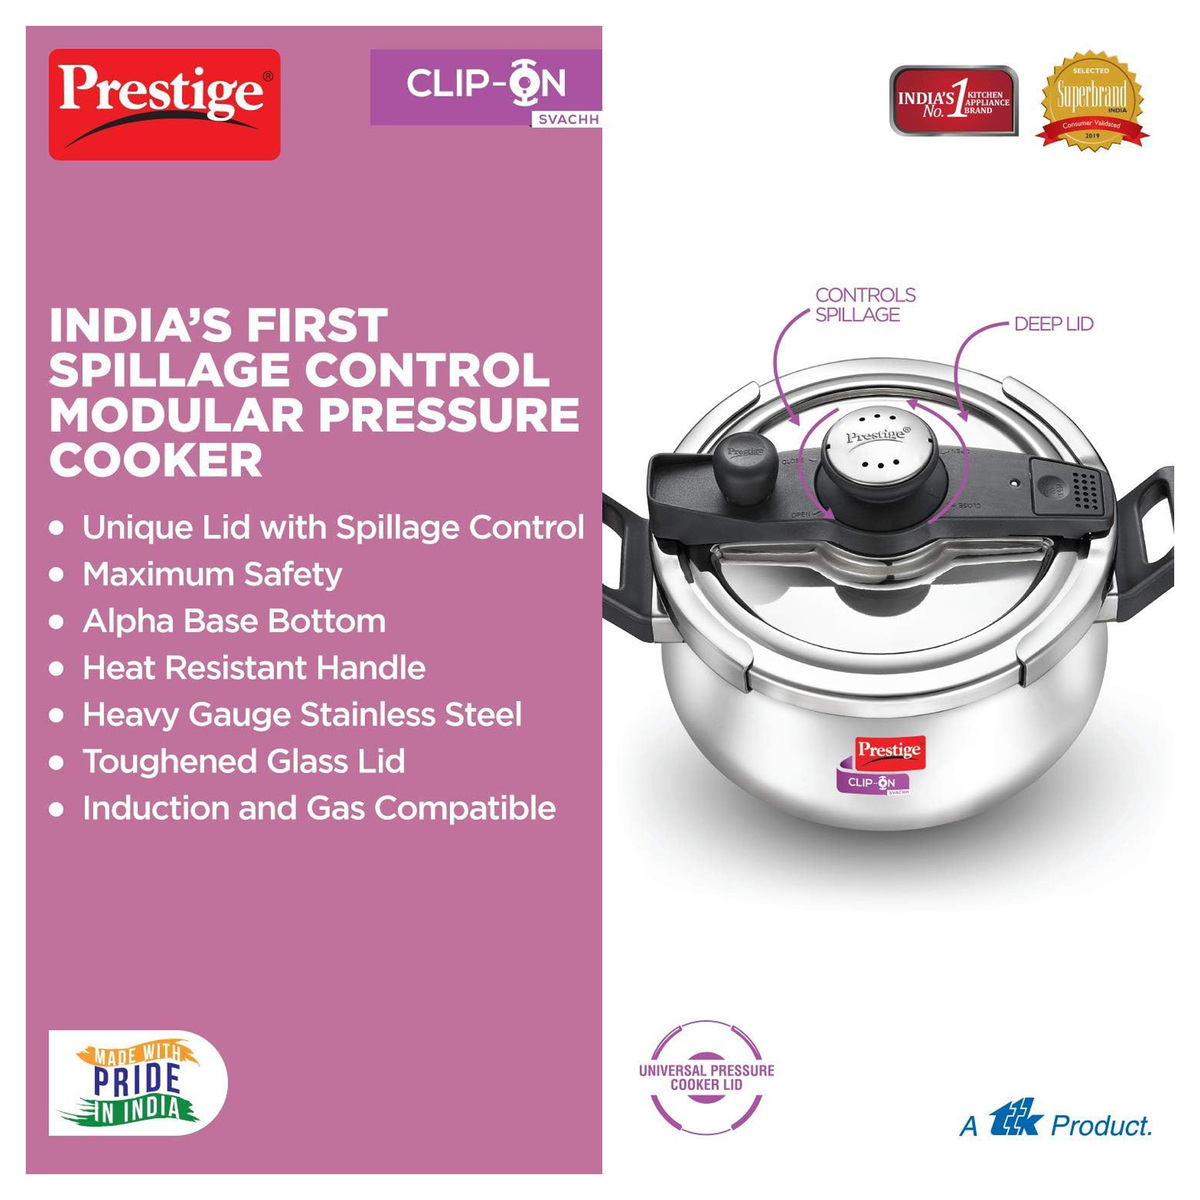 Prestige Stainless Steel Svach Clip-On Pressure Cooker 5Litres MPCH20233